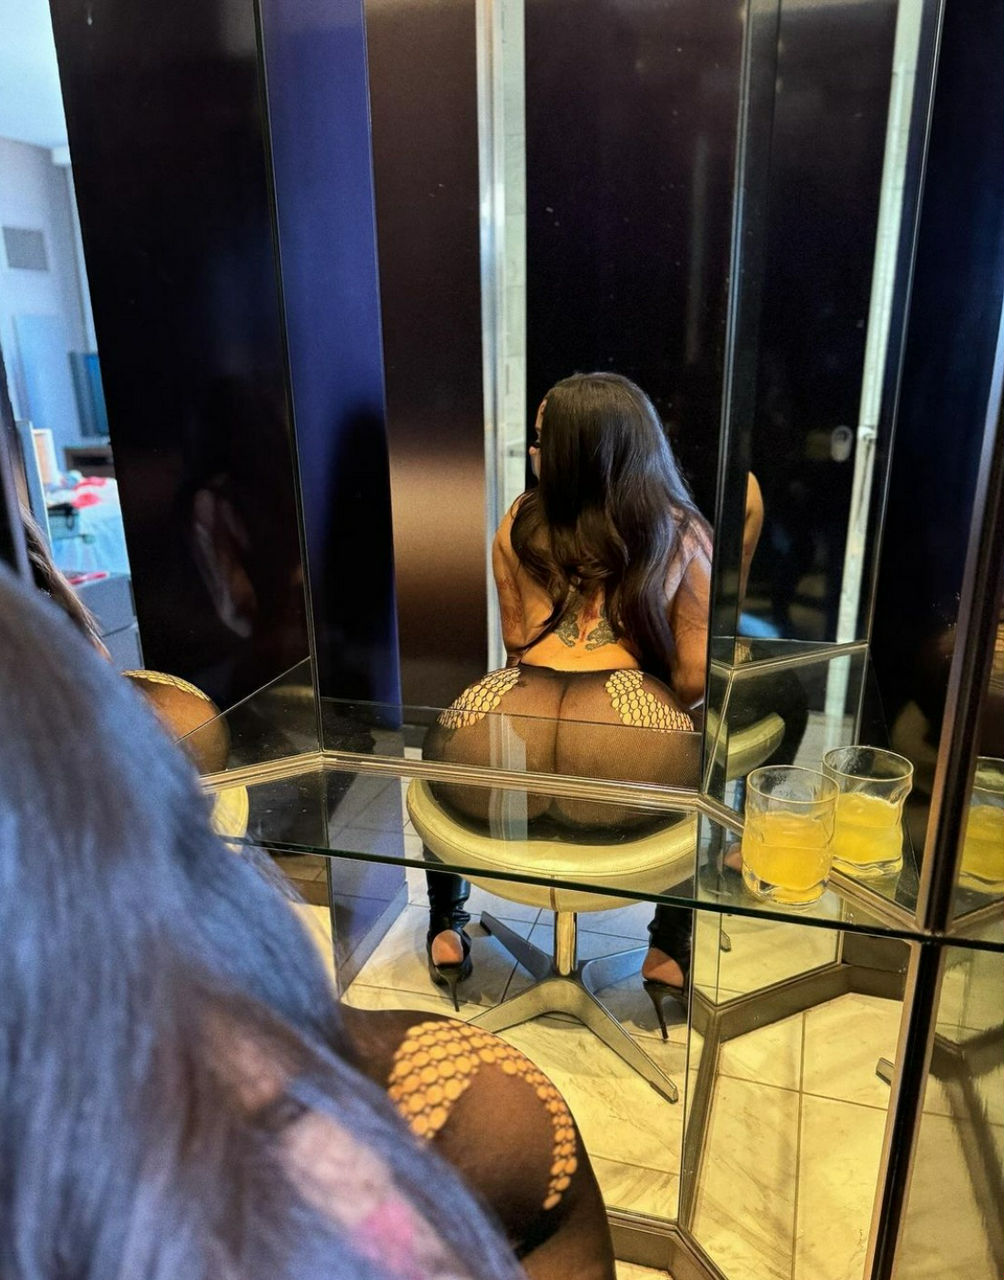 Bad lady you know I’m Classy🤤💯😍 I’M AVAILABLE FOR A PLEASURABLE MOMENT🤤💦👅💋 Hi, I’m Amber, you don’t only have the cha...